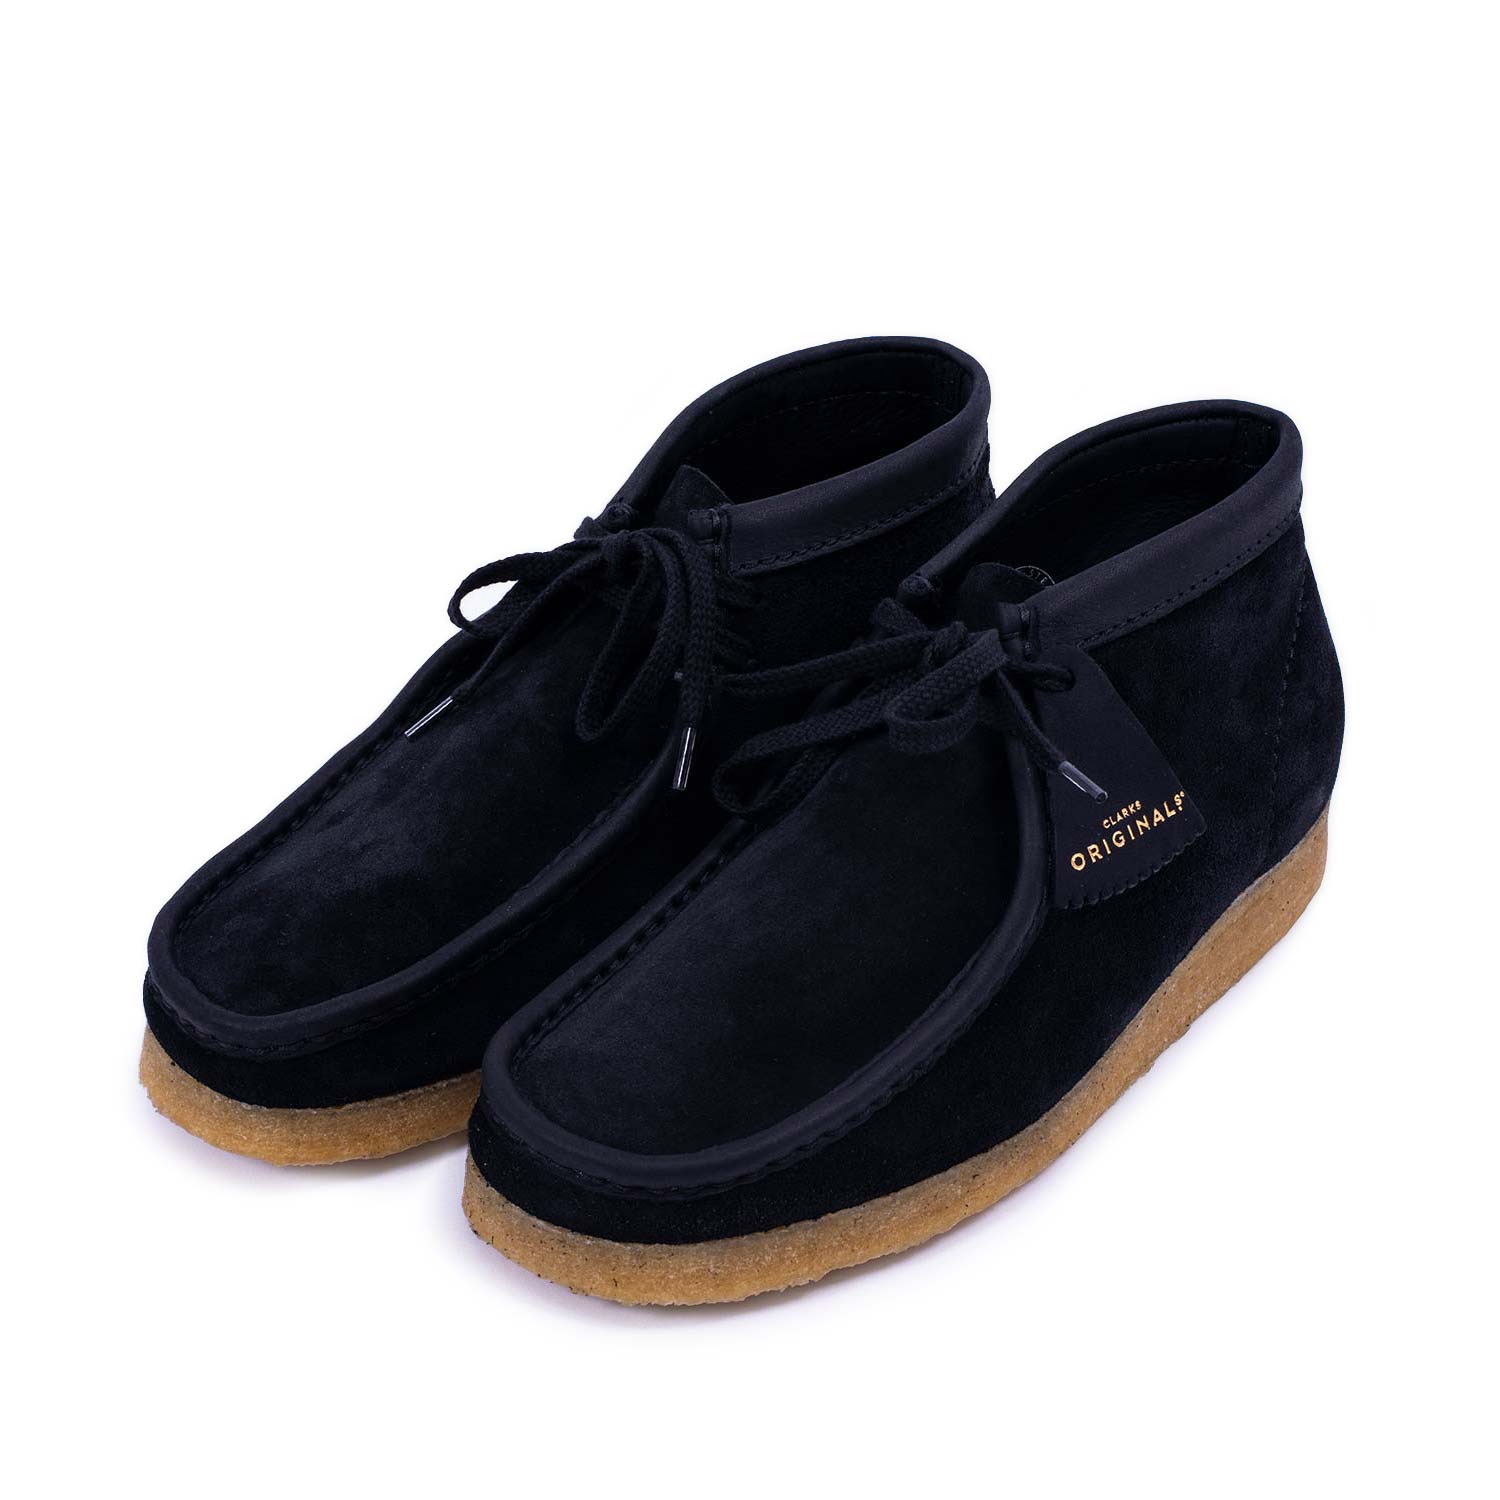 wallabee made in italy